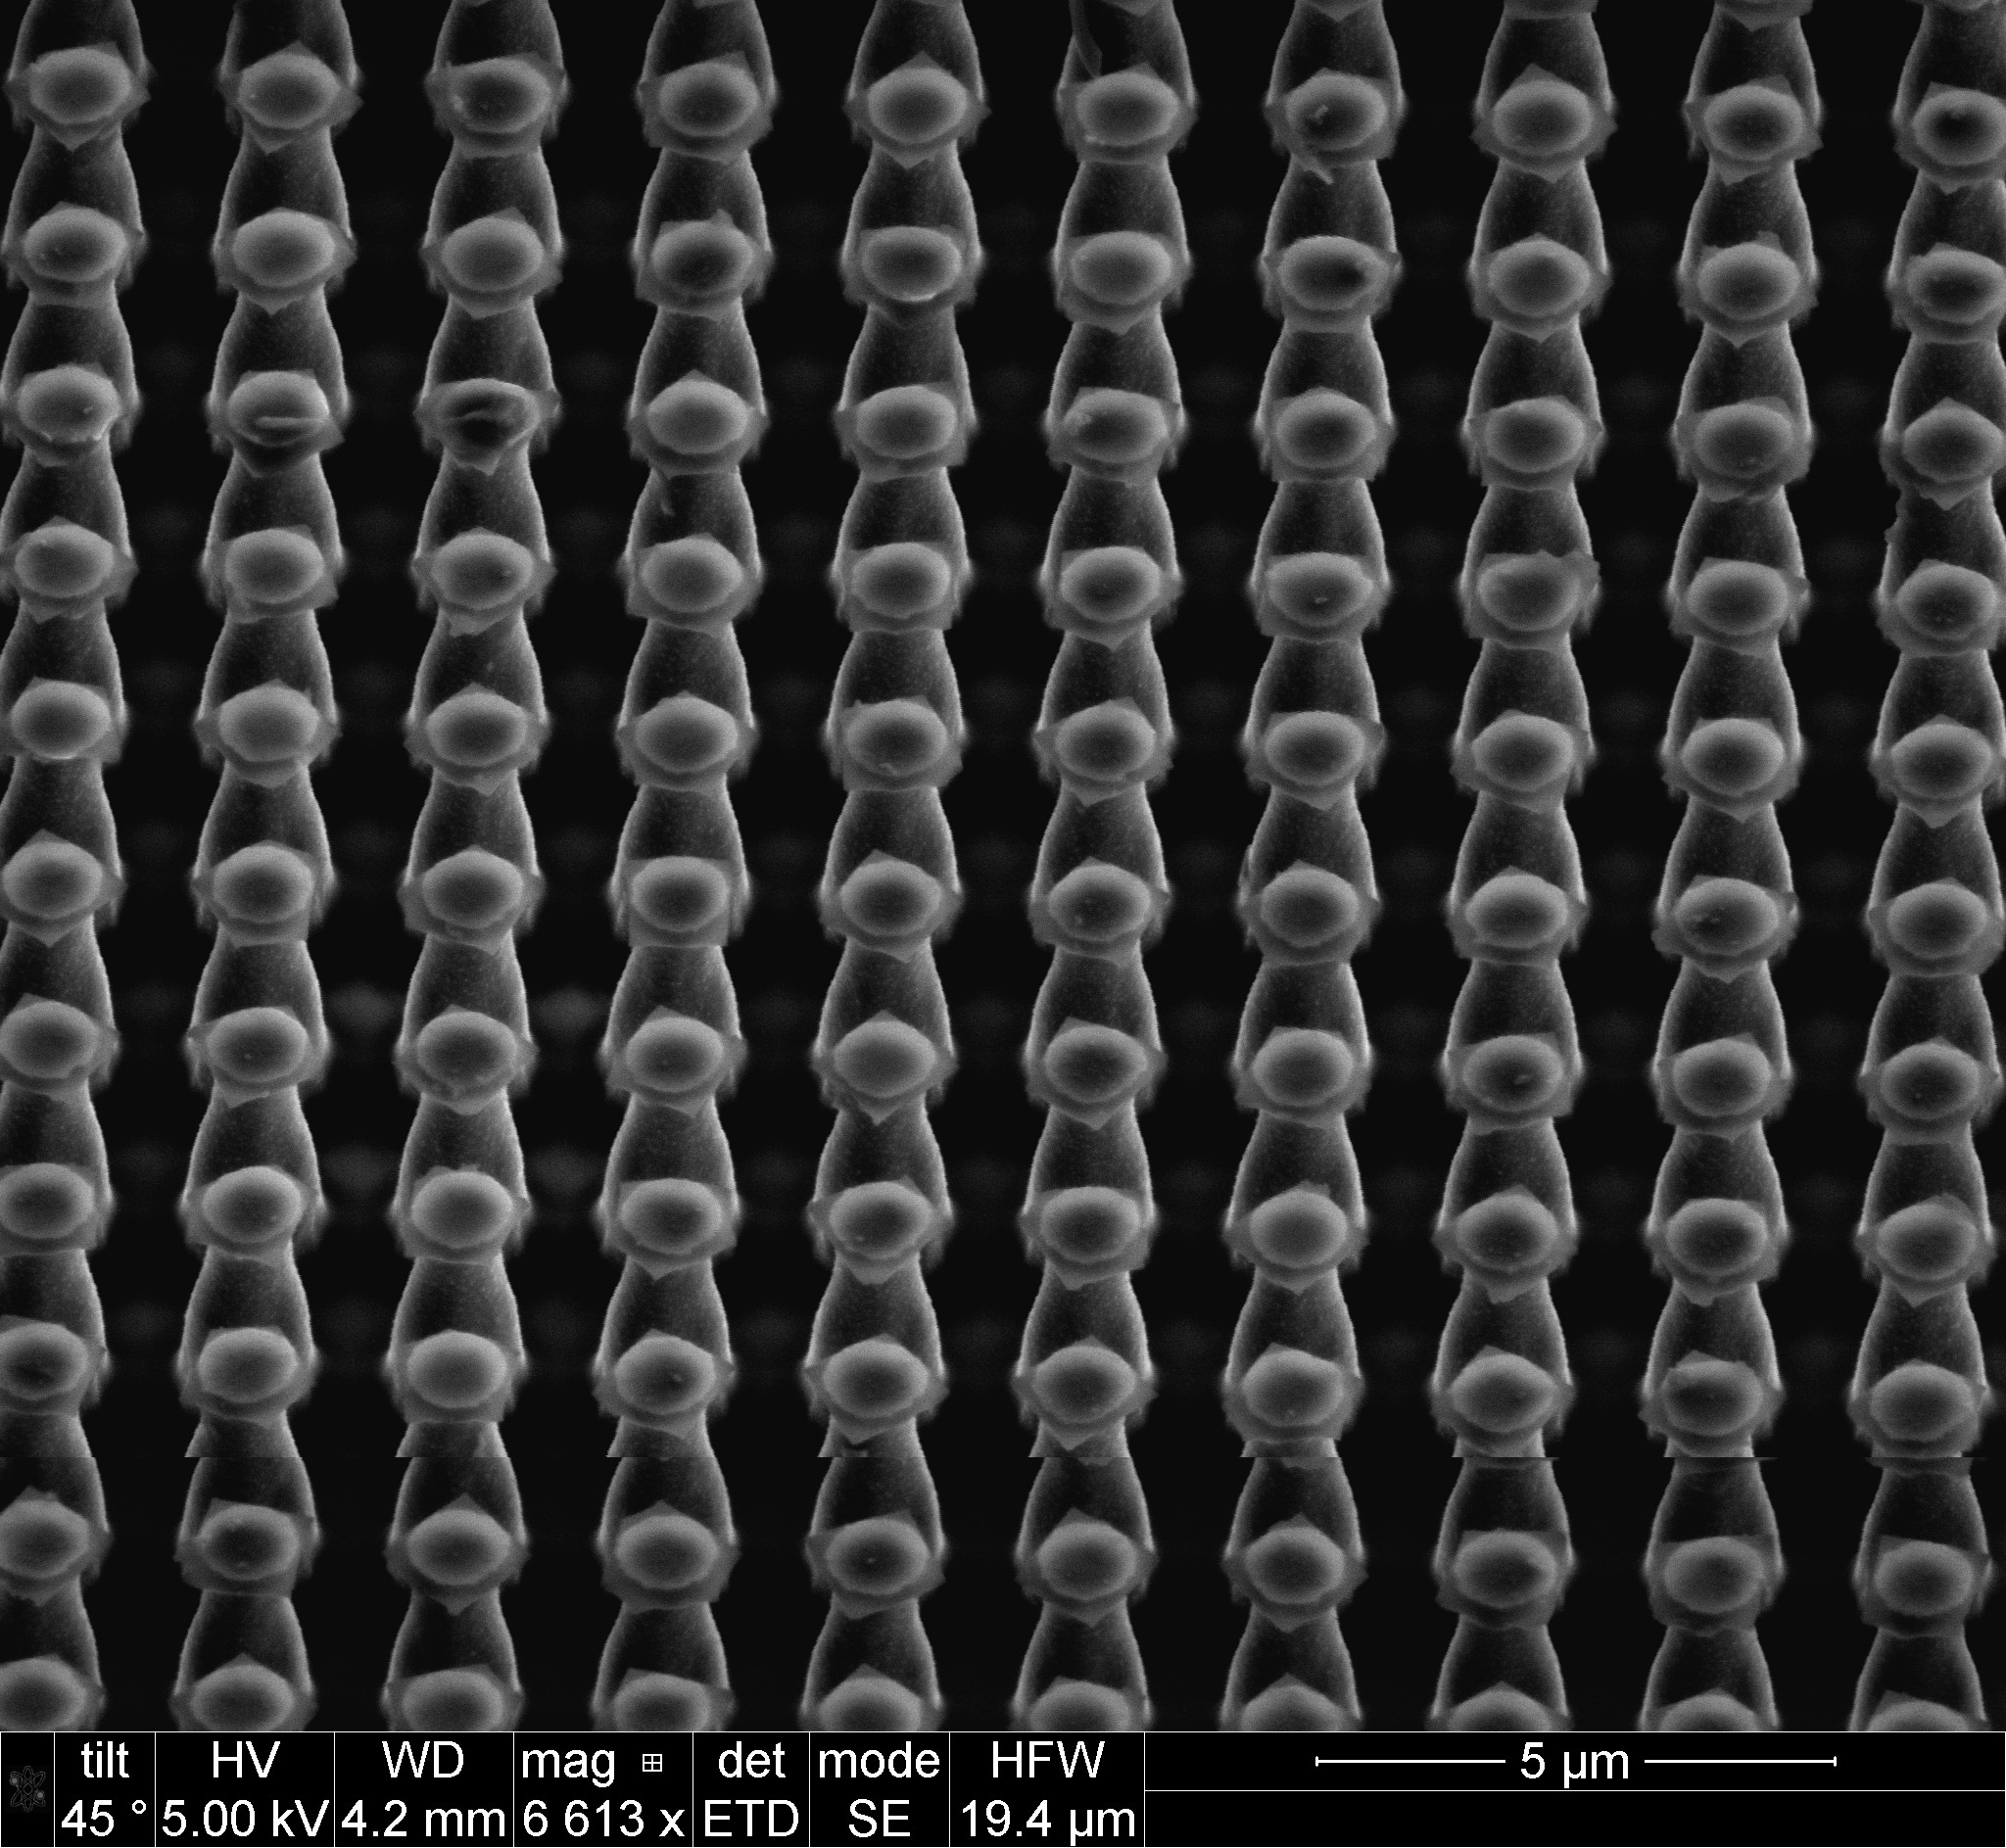 'No Social Distancing!?': These bottle-shaped structures were obtained during a low temperature (-90 ºC) cryo-based silicon etch process in Oxford Reactive Ion Etching tool. The goal of this process is to fabricate high-density sharp, pointed structures using 30 nm circular chrome mask dots with a pitch of 2 µm. T first few minutes of etch results in these structures.  This image is a part of research integrating semiconductor-based components and functionality into soft microfluidics for the lysis of microbial cells (<5 µm) for single cell genomics and other biological applications. The tool used for imaging is an FIB FEI Nova 600 NanoLab.